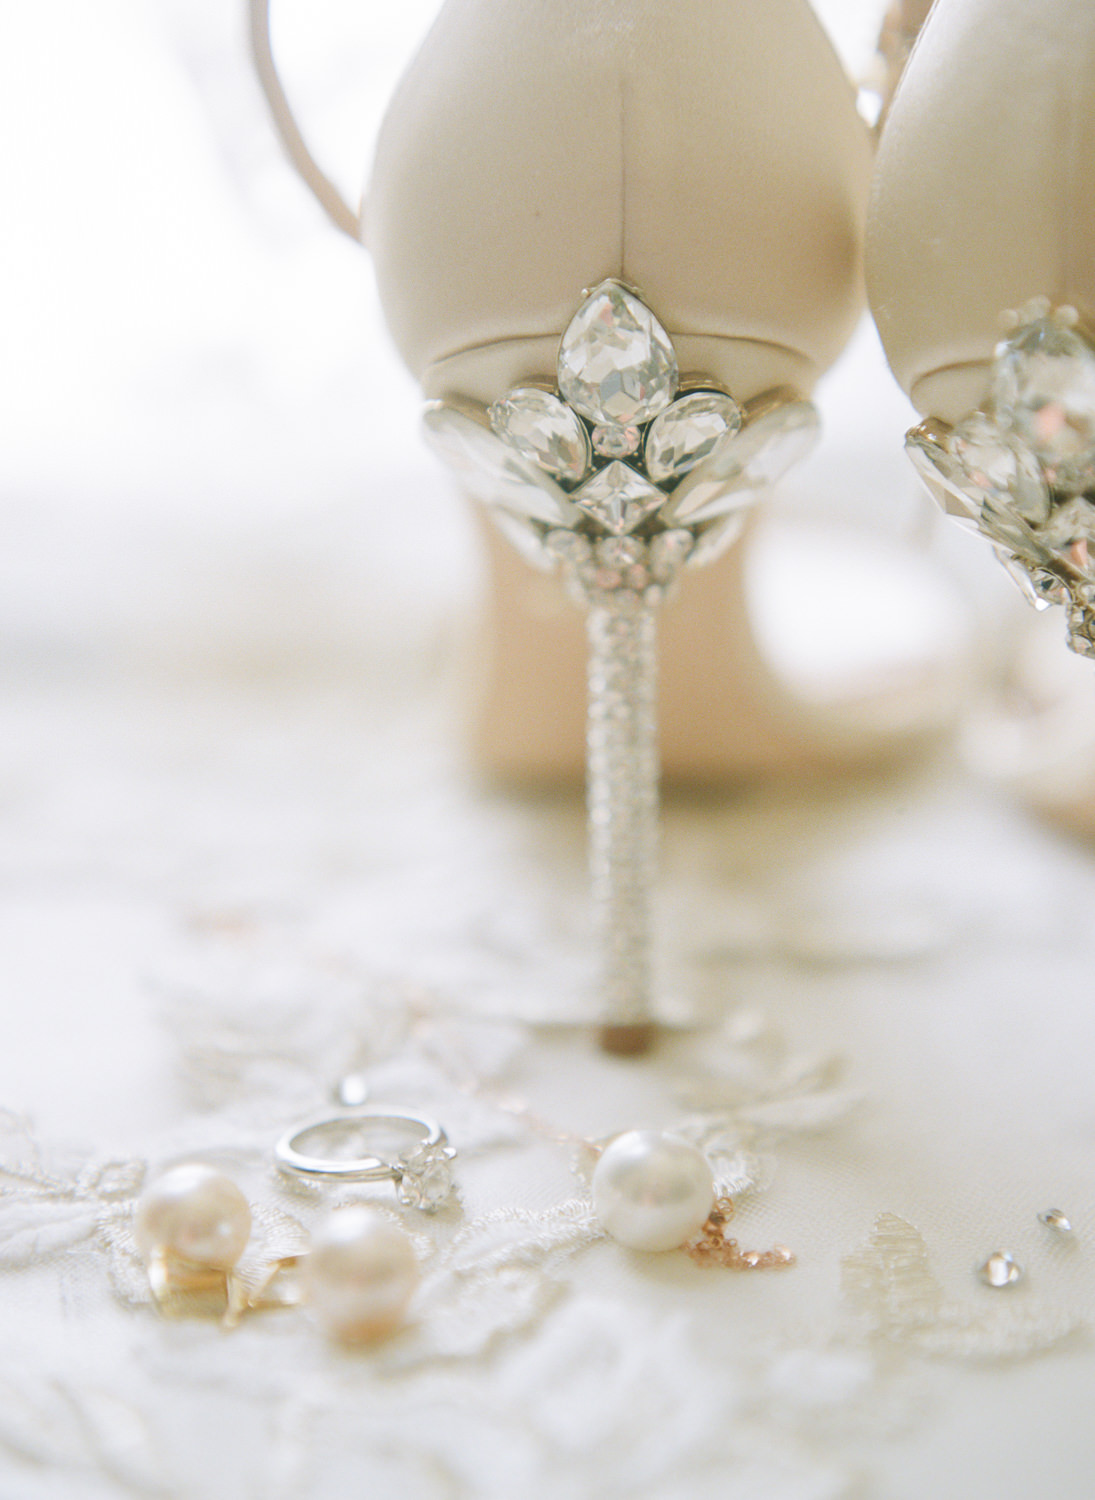 Wedding shoes and jewelry details; St. Louis fine art film wedding photographer Erica Robnett Photography